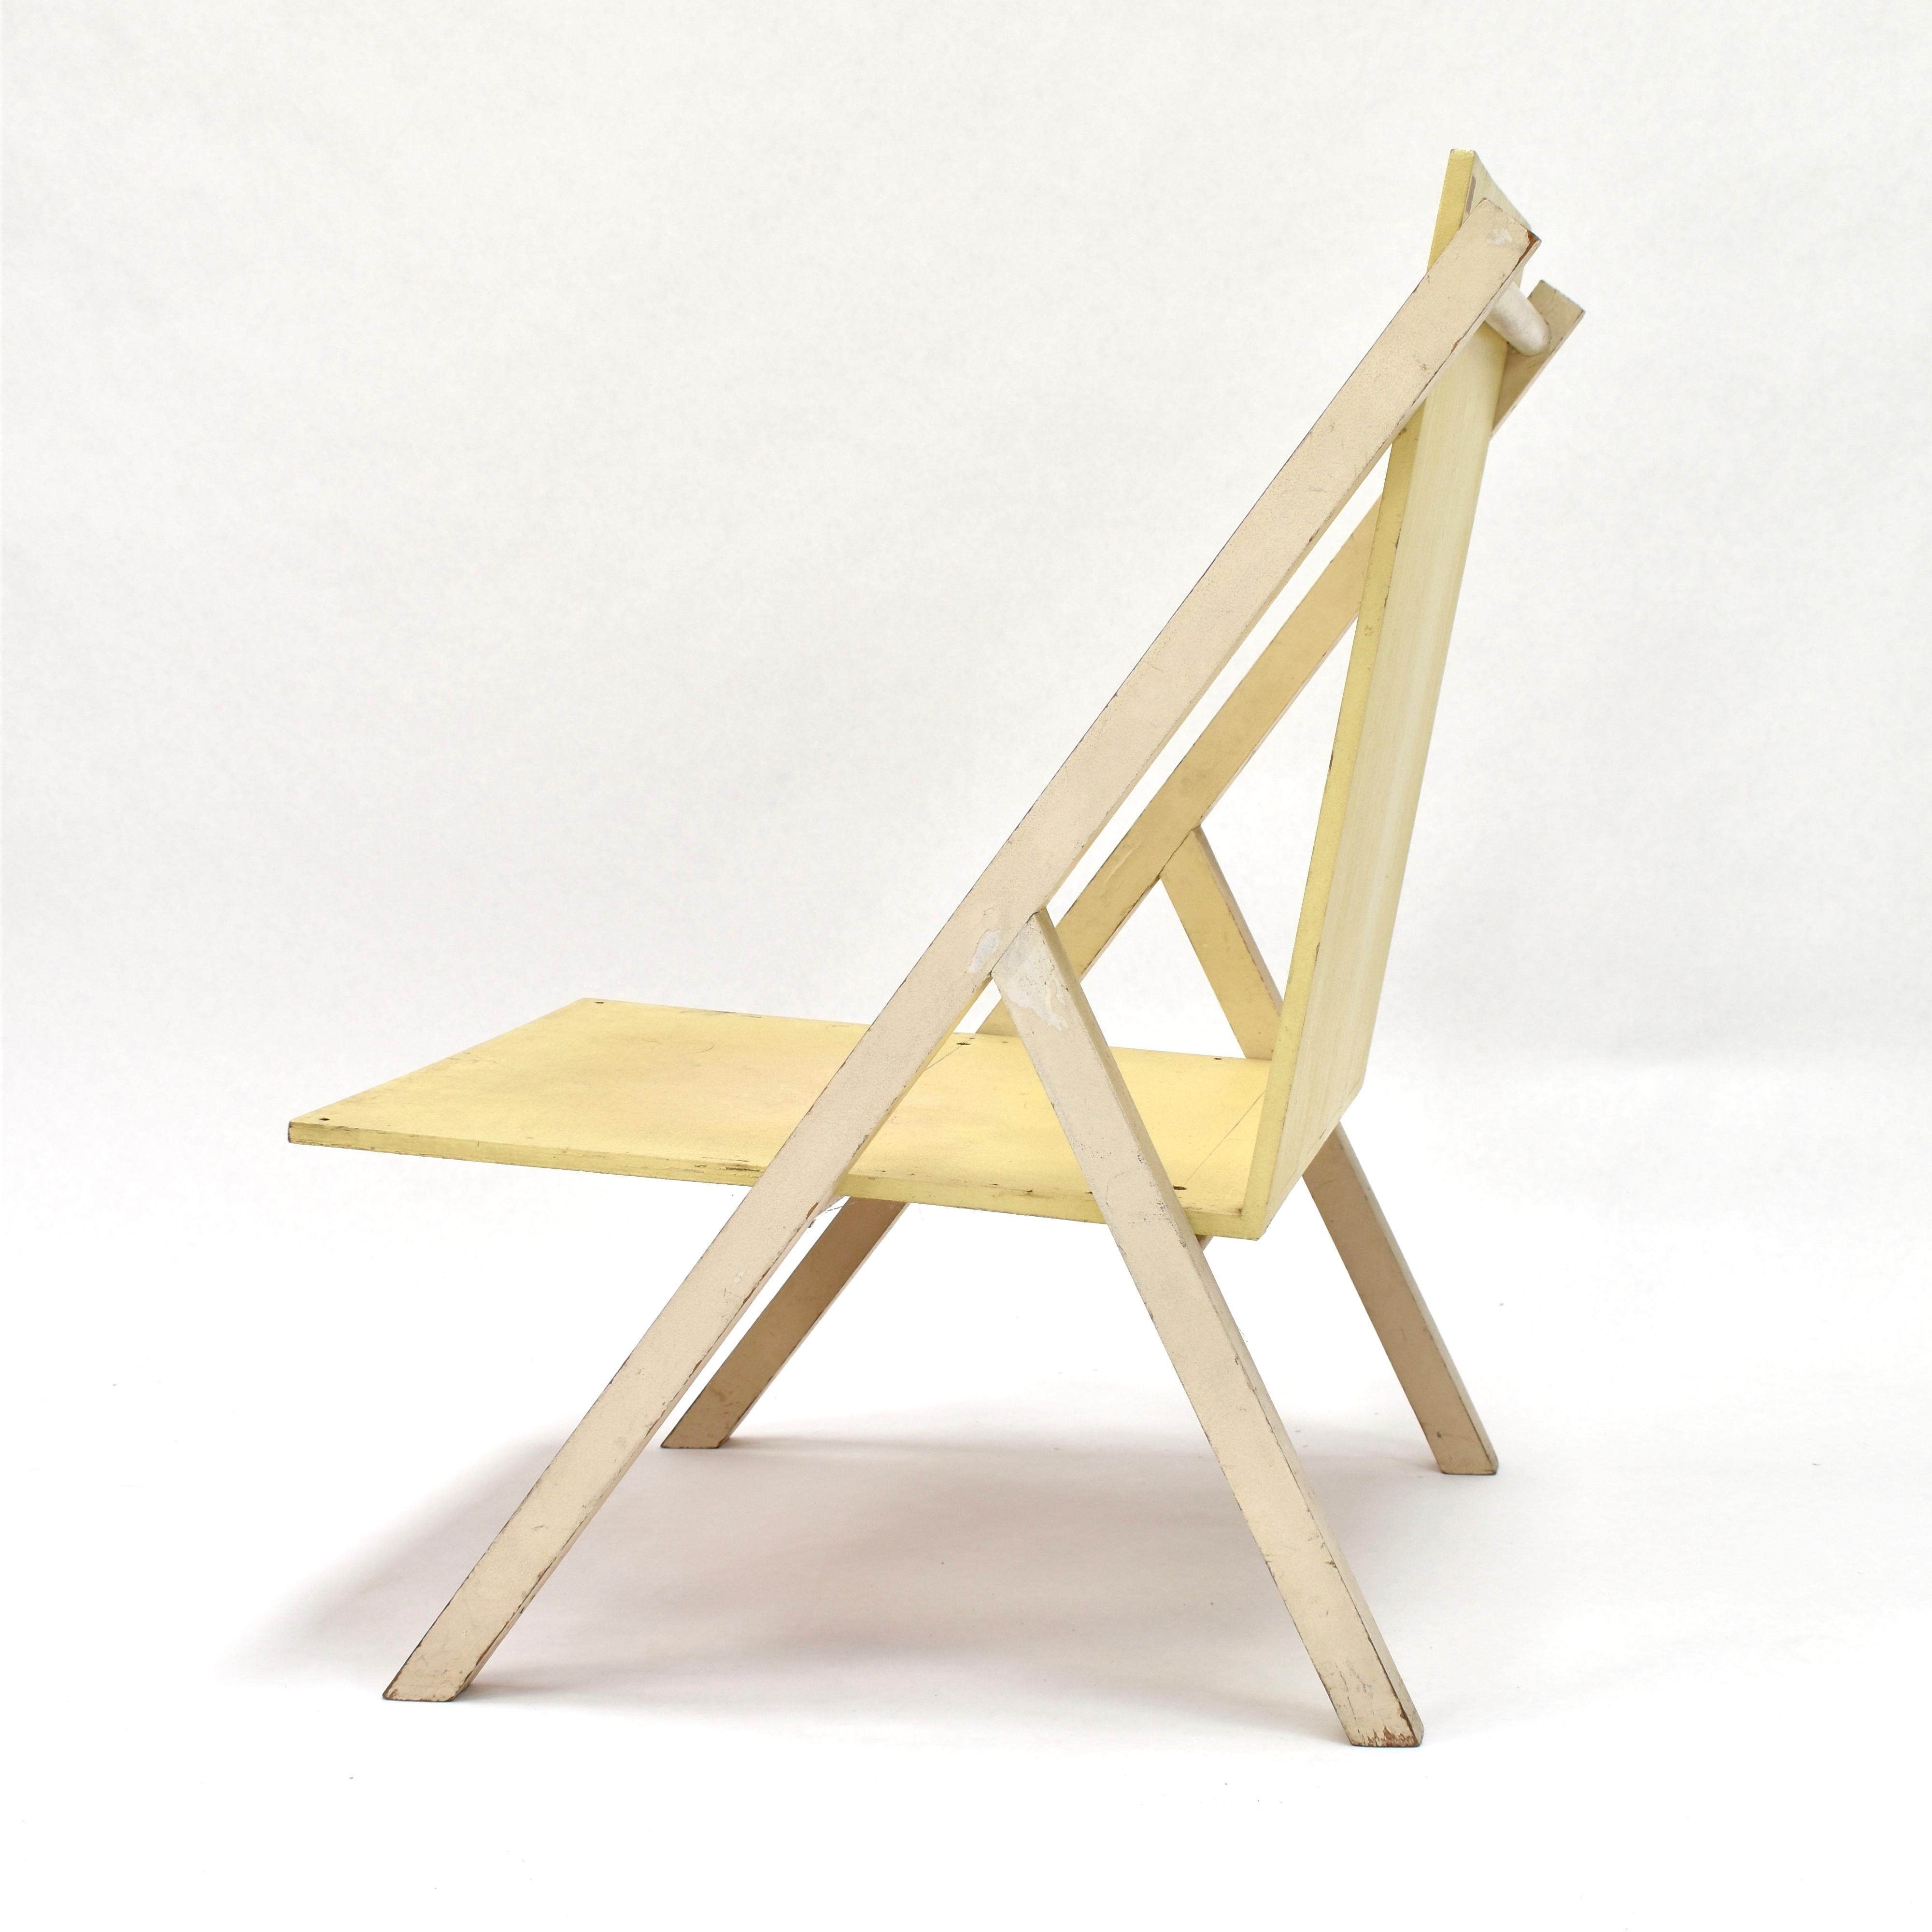 Museum piece! Prototype for a salon chair by Gerrit Rietveld Jr. 1920 - 1961, son of the famous Dutch designer Gerrit Rietveld Sr. who was part of the 'De Stijl' group.
A similar chair is part of the collection of the Central Museum in Utrecht, The